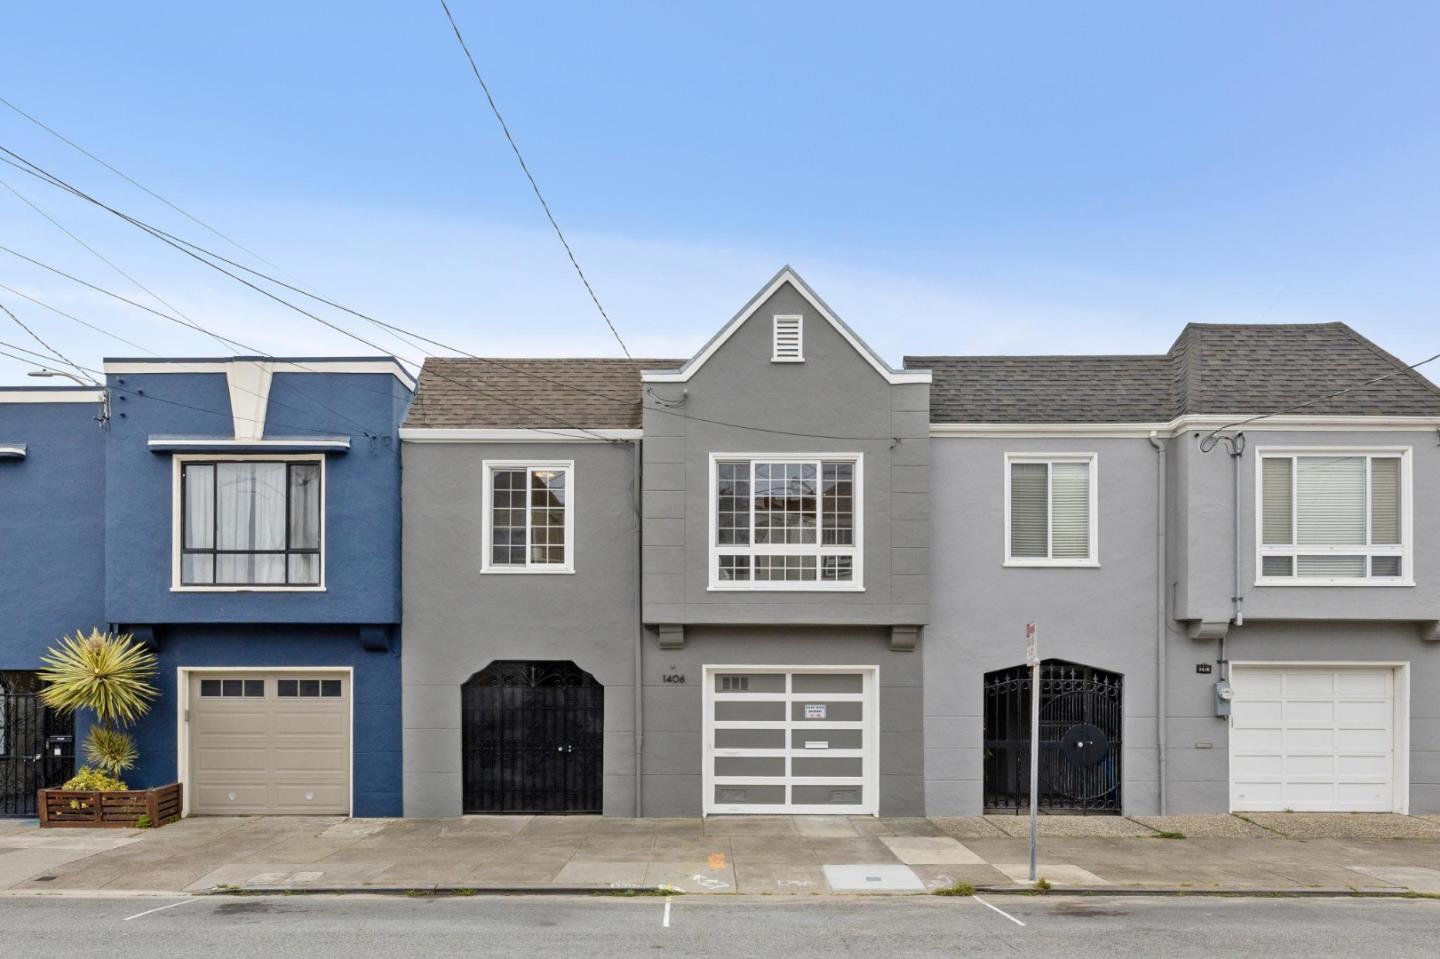 Photo of 1406 43rd Ave in San Francisco, CA